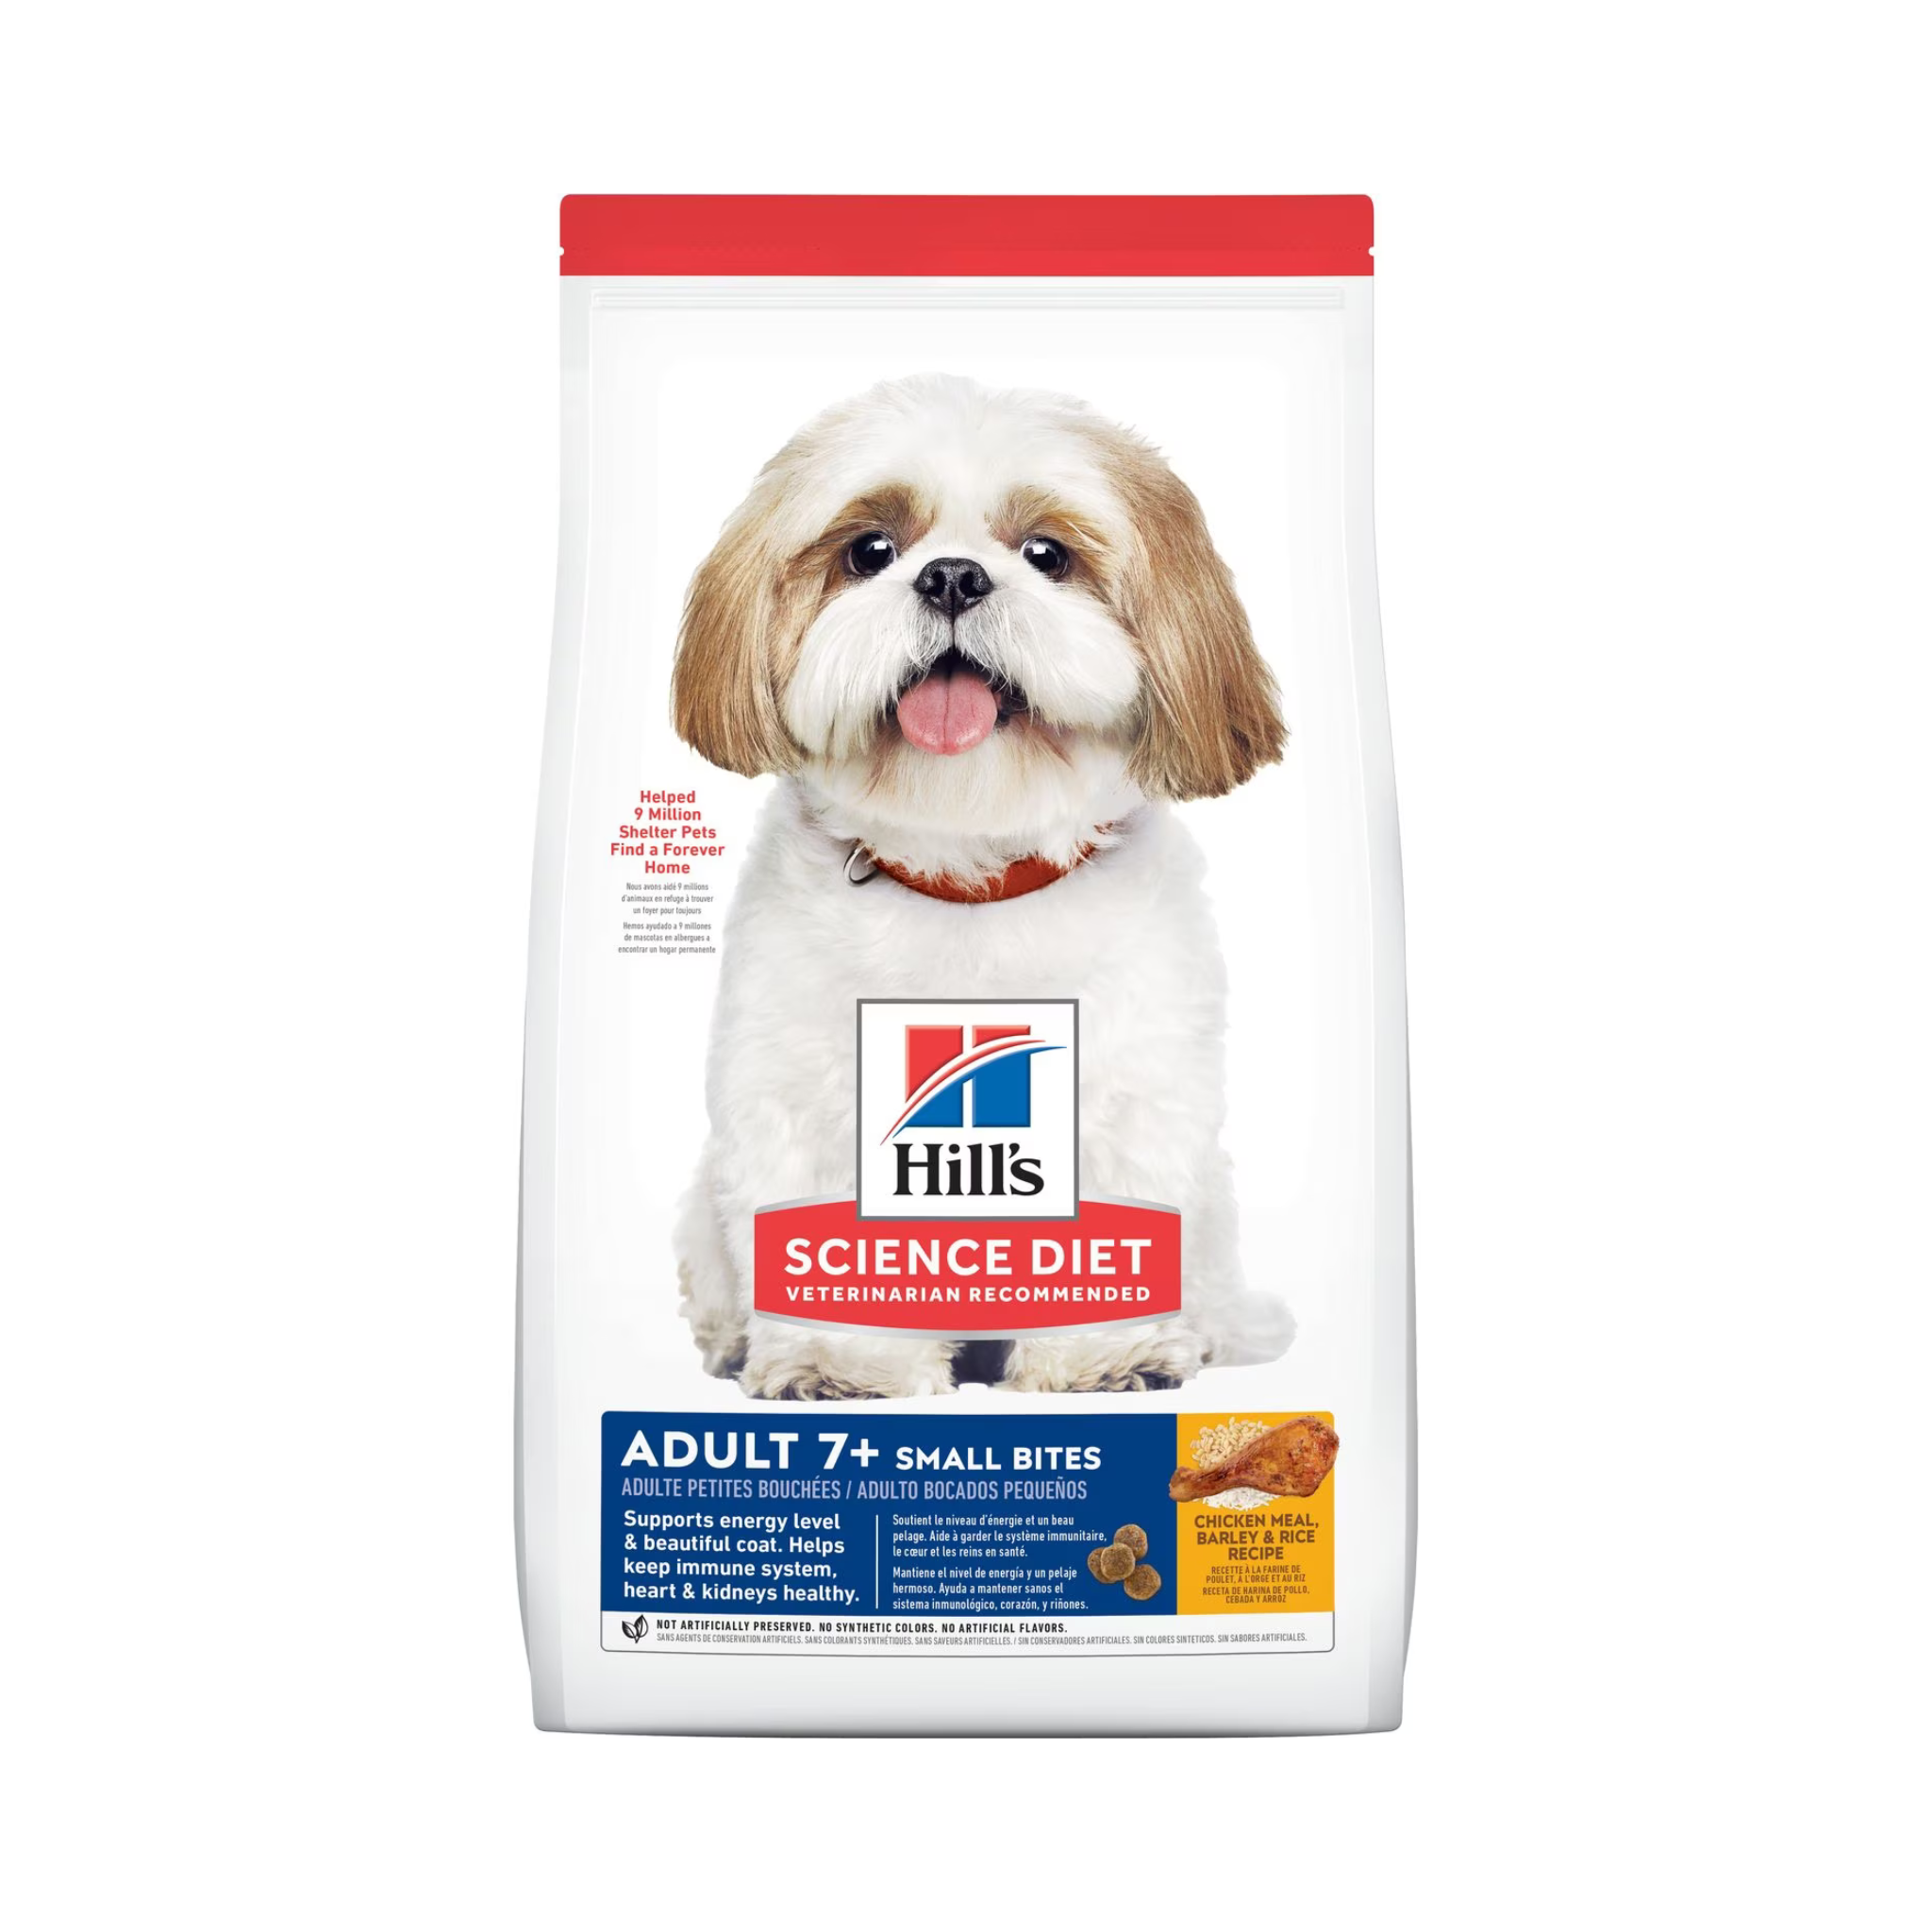 Hill's Science Diet Adult 7+ Small Bites Chicken Dry Dog Food